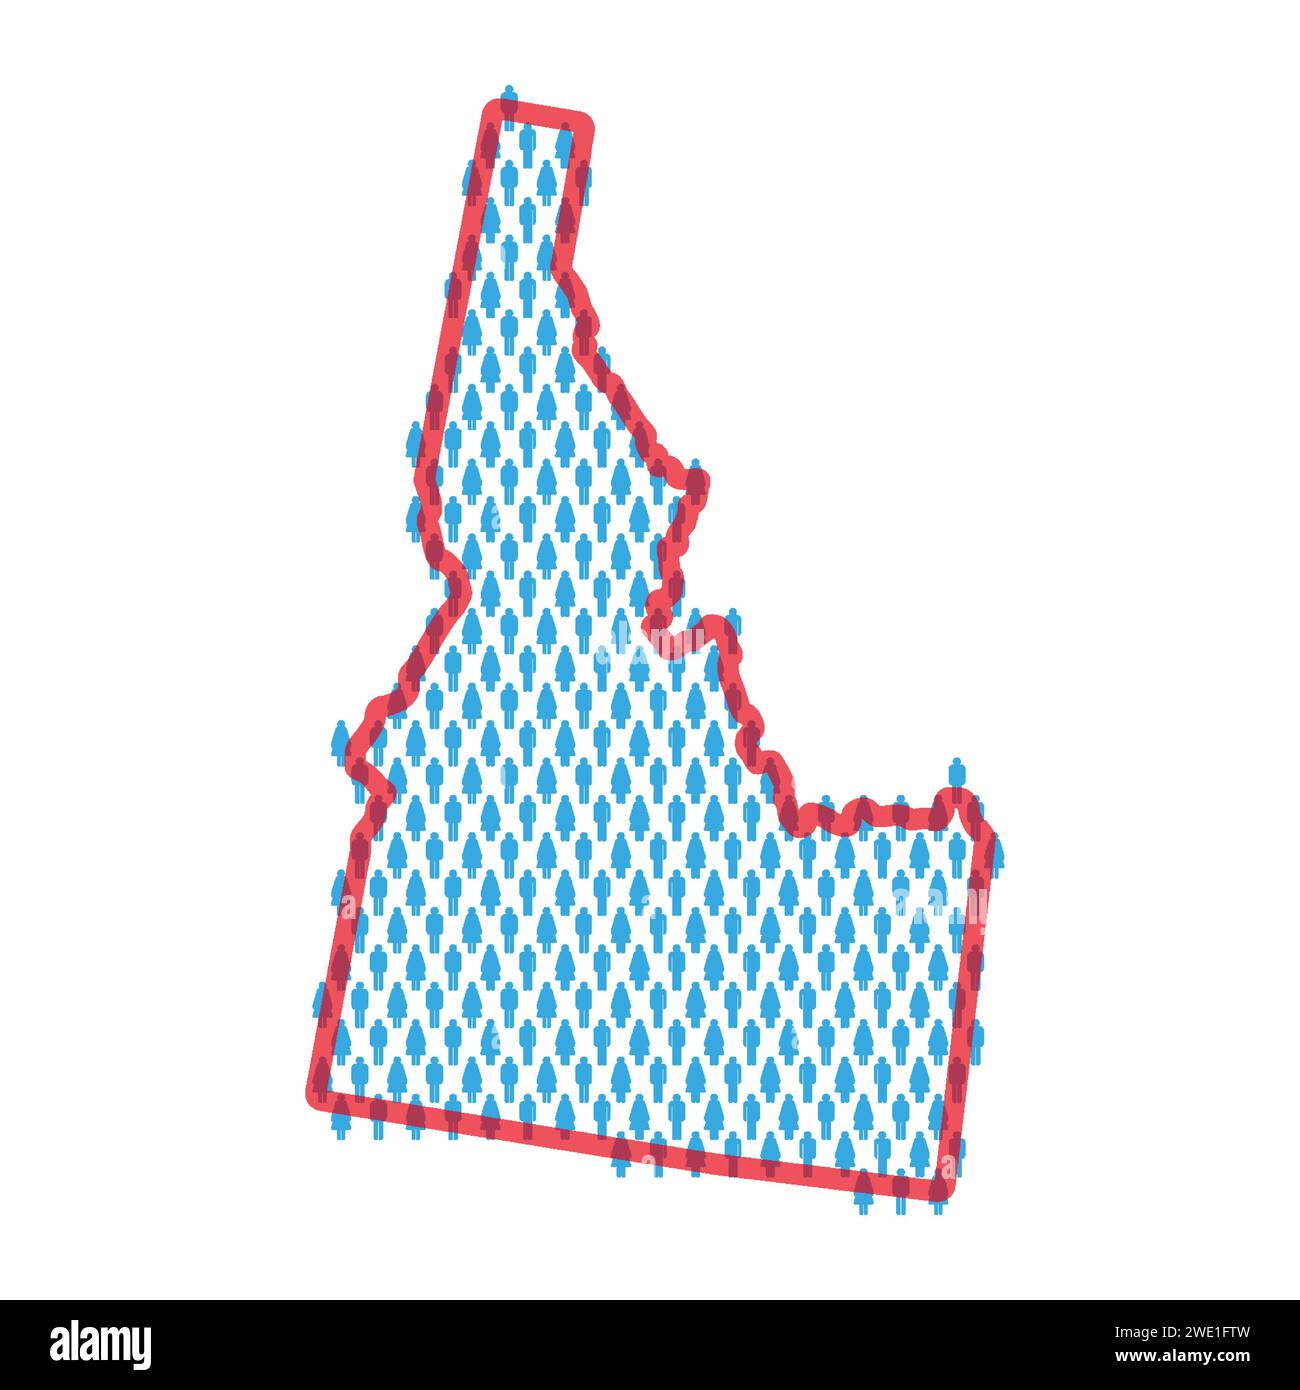 Idaho population map. Stick figures people map with bold red translucent state border. Pattern of men and women icons. Isolated vector illustration. E Stock Vector